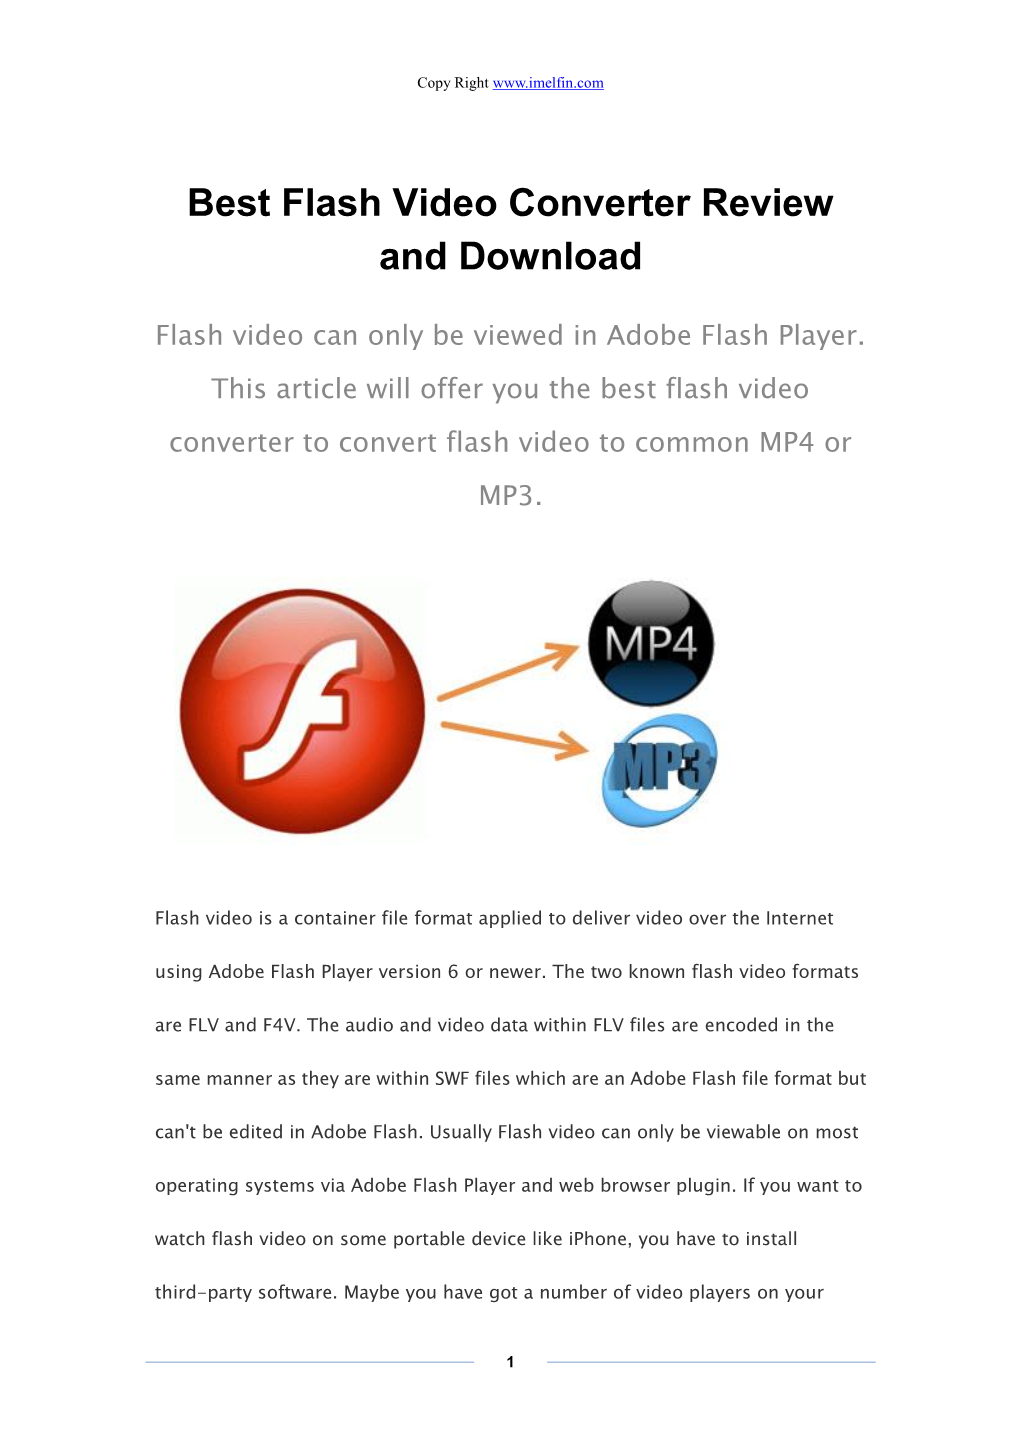 Best Flash Video Converter Review and Download